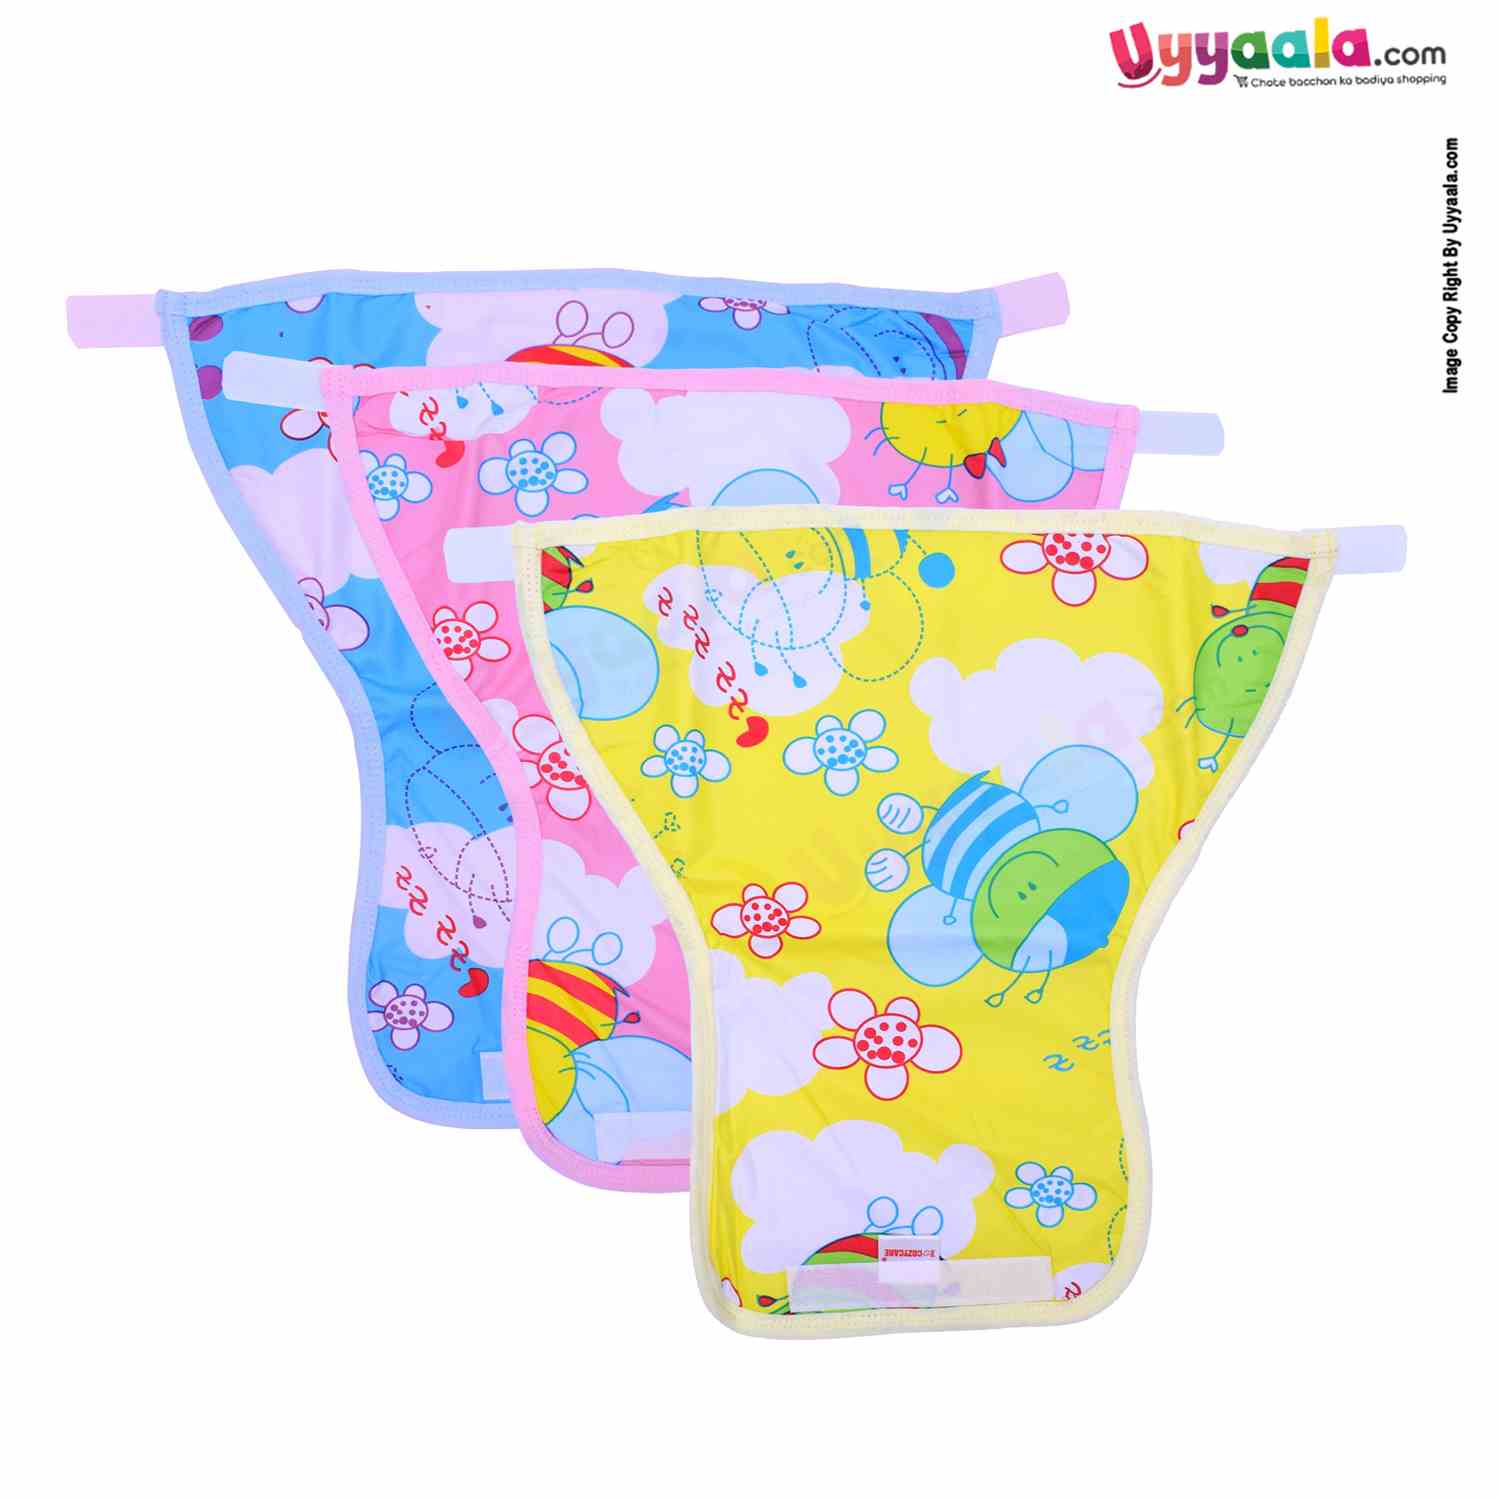 COZYCARE Washable Diapers Plastic Velcro, Honey Bee Print Blue, Pink& Yellow With Out Pads- 3P Set (XL)